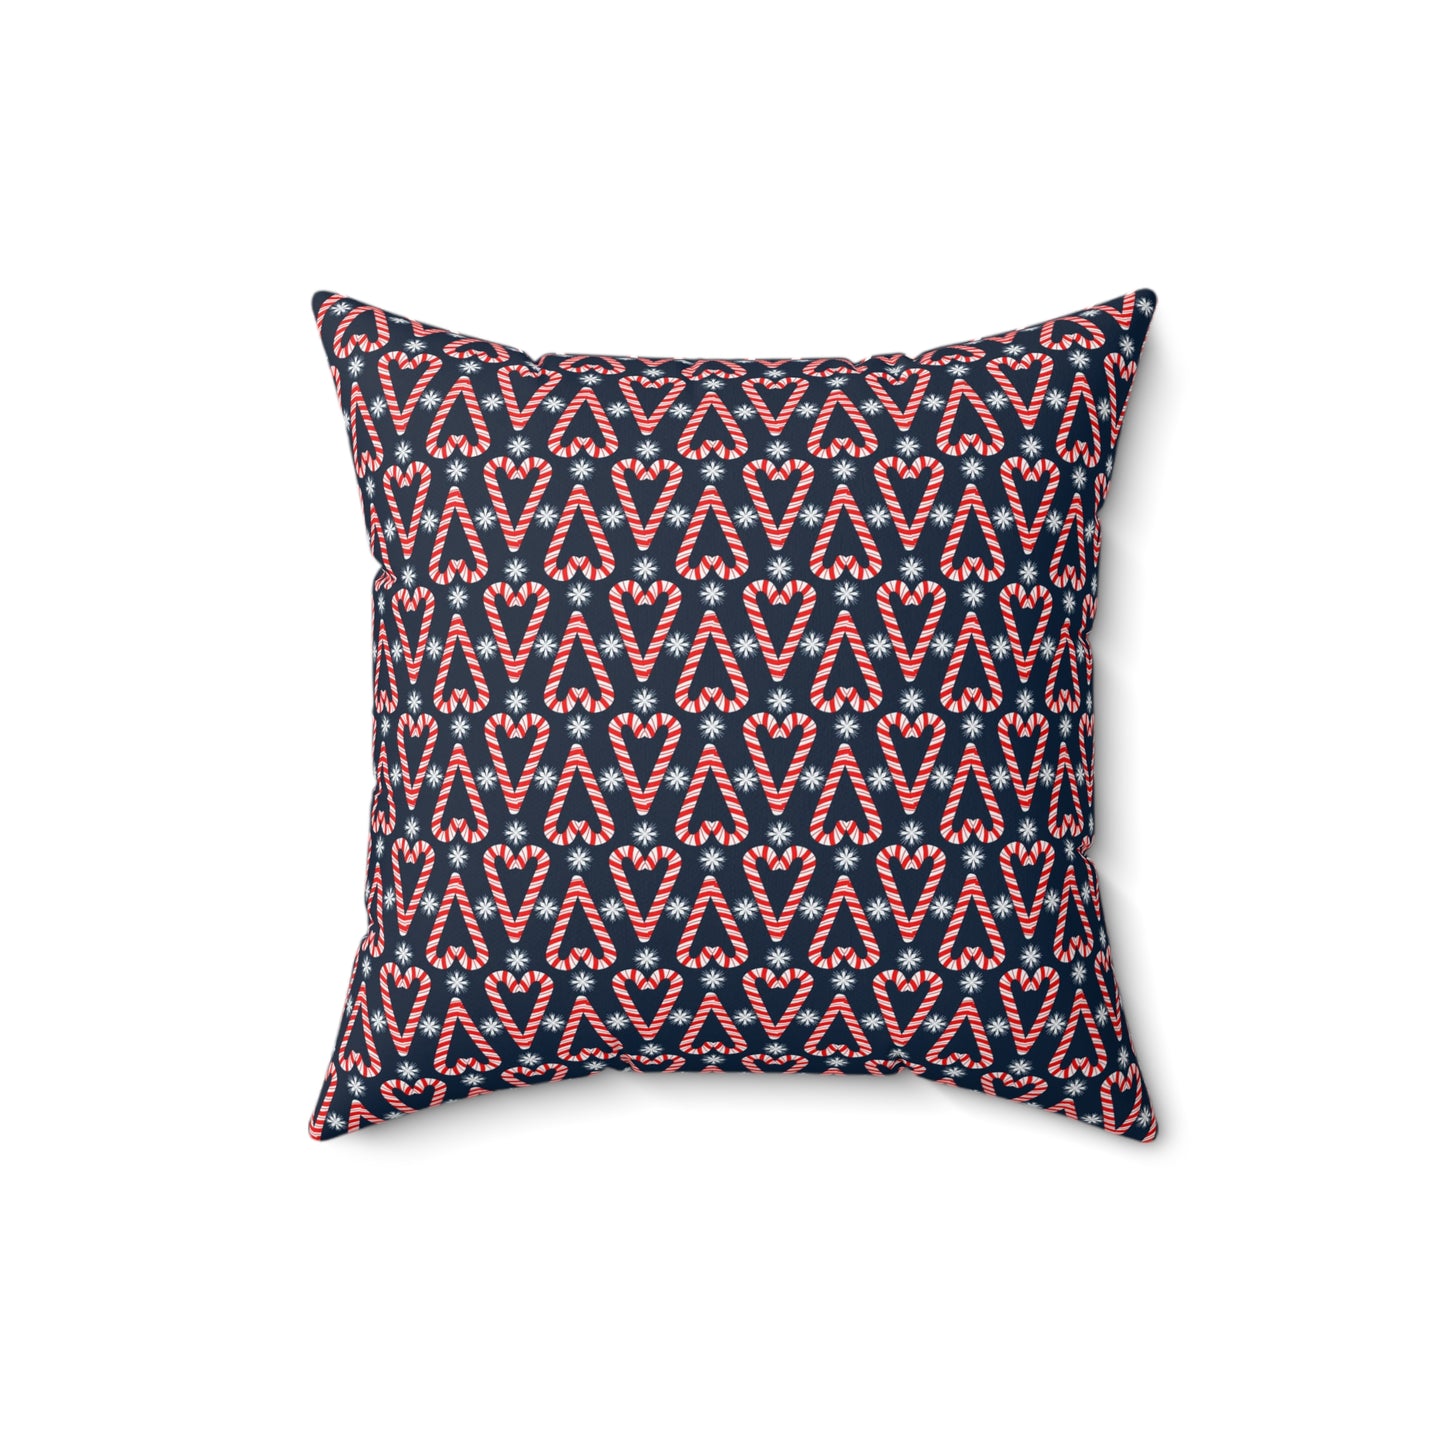 Candy Cane Hearts Spun Polyester Square Pillow